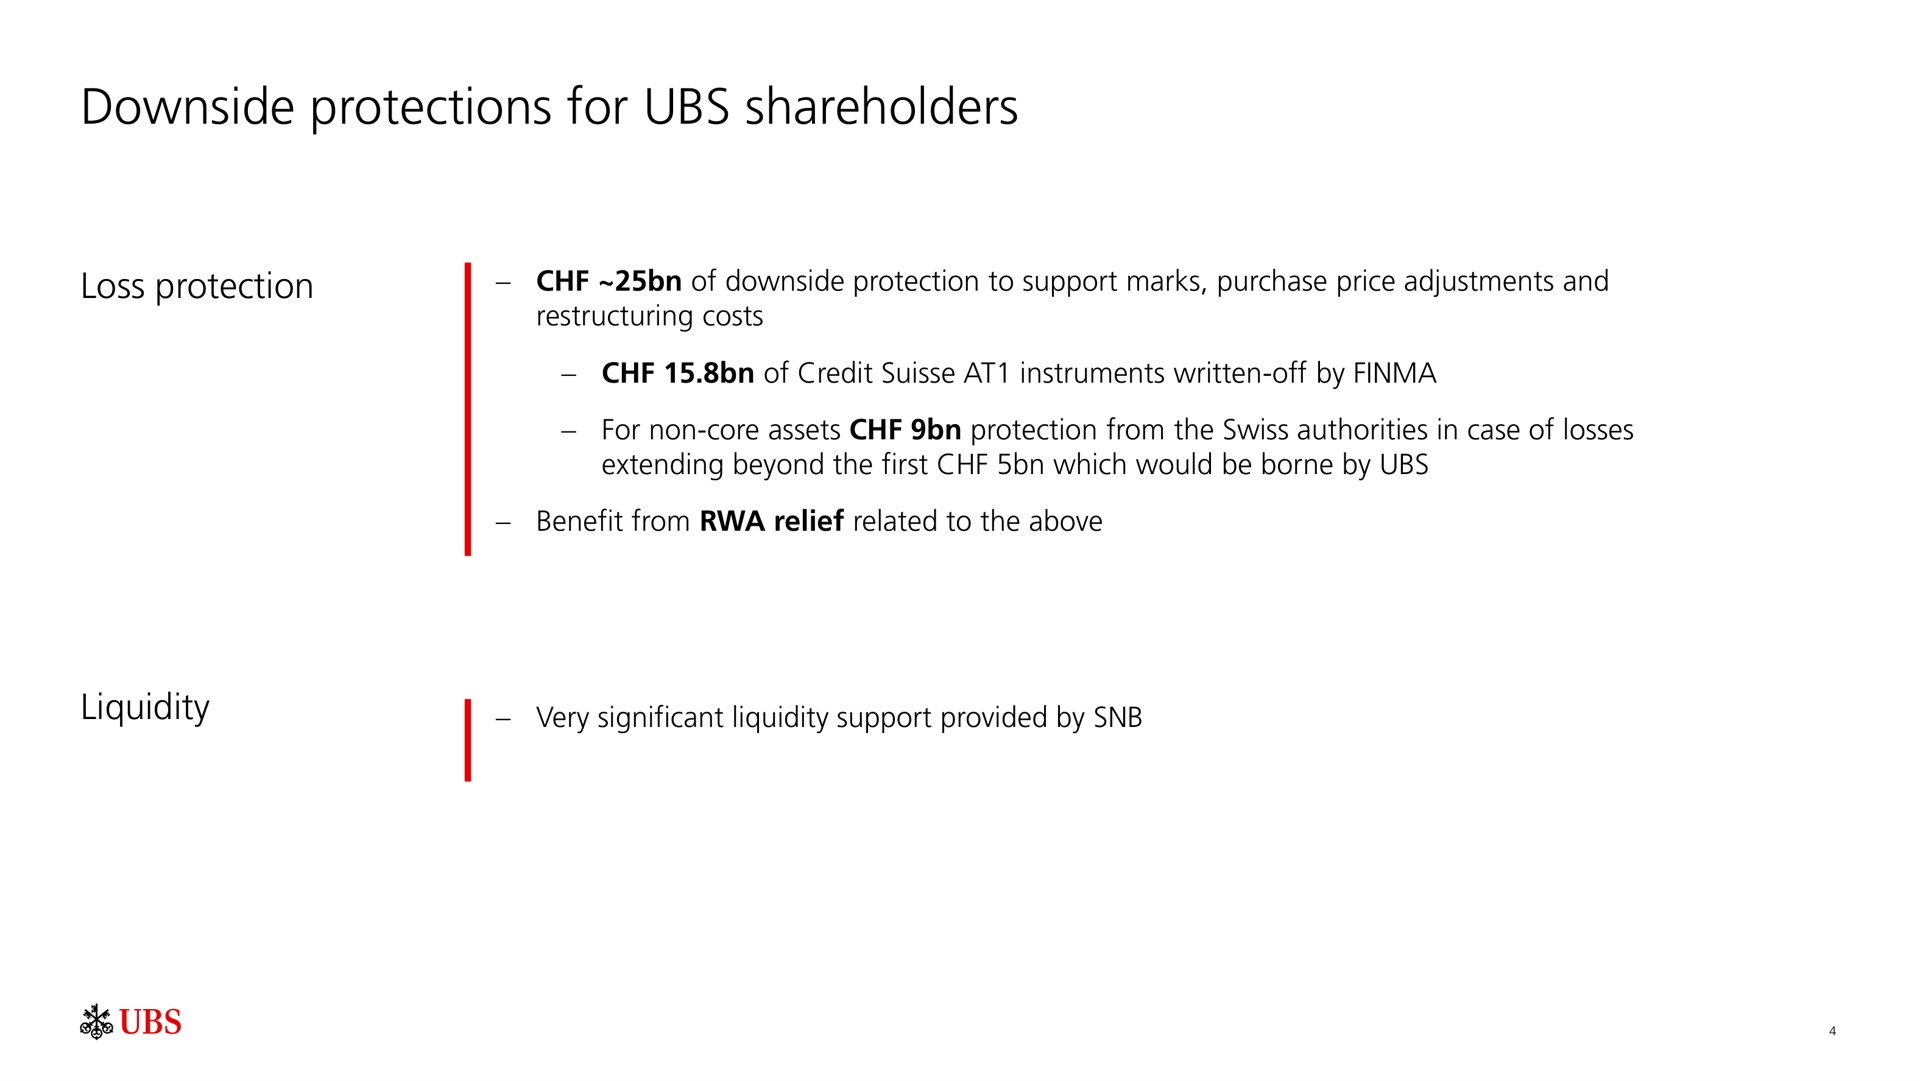 downside protections for shareholders | UBS